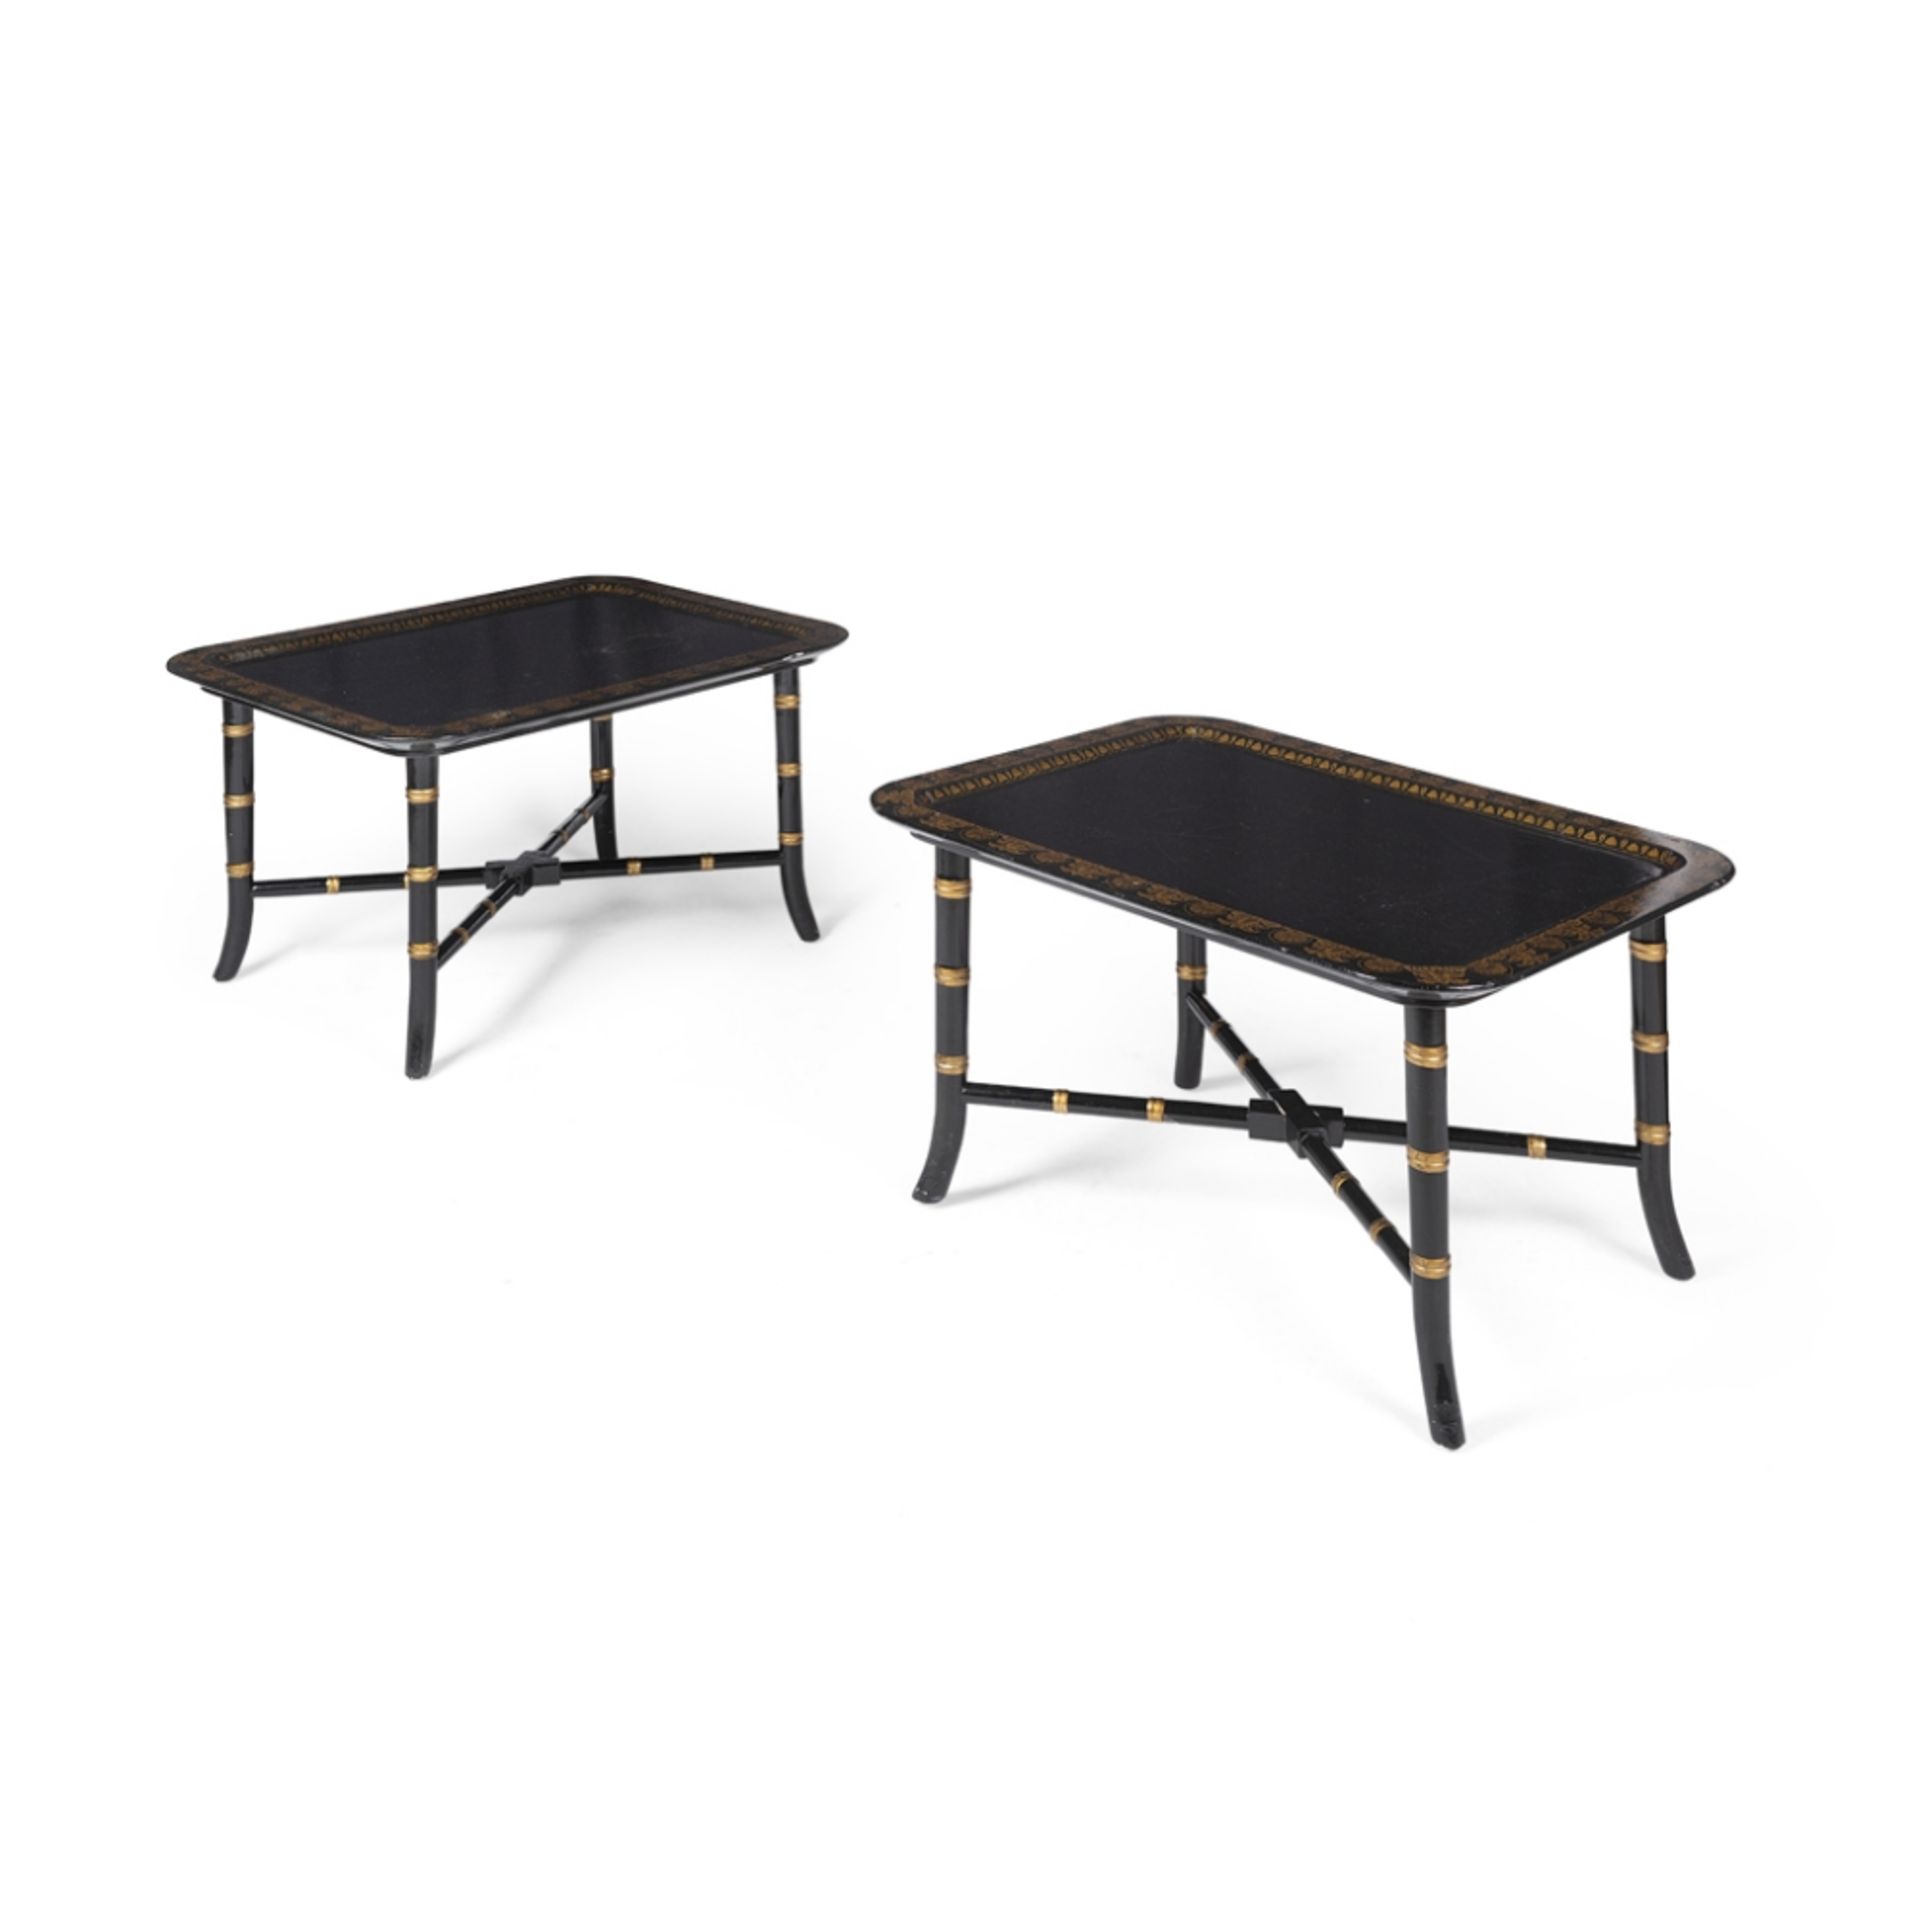 PAIR BLACK LACQUER AND PARCEL GILT LOW TABLESMODERN the rounded rectangular tray tops with gilt